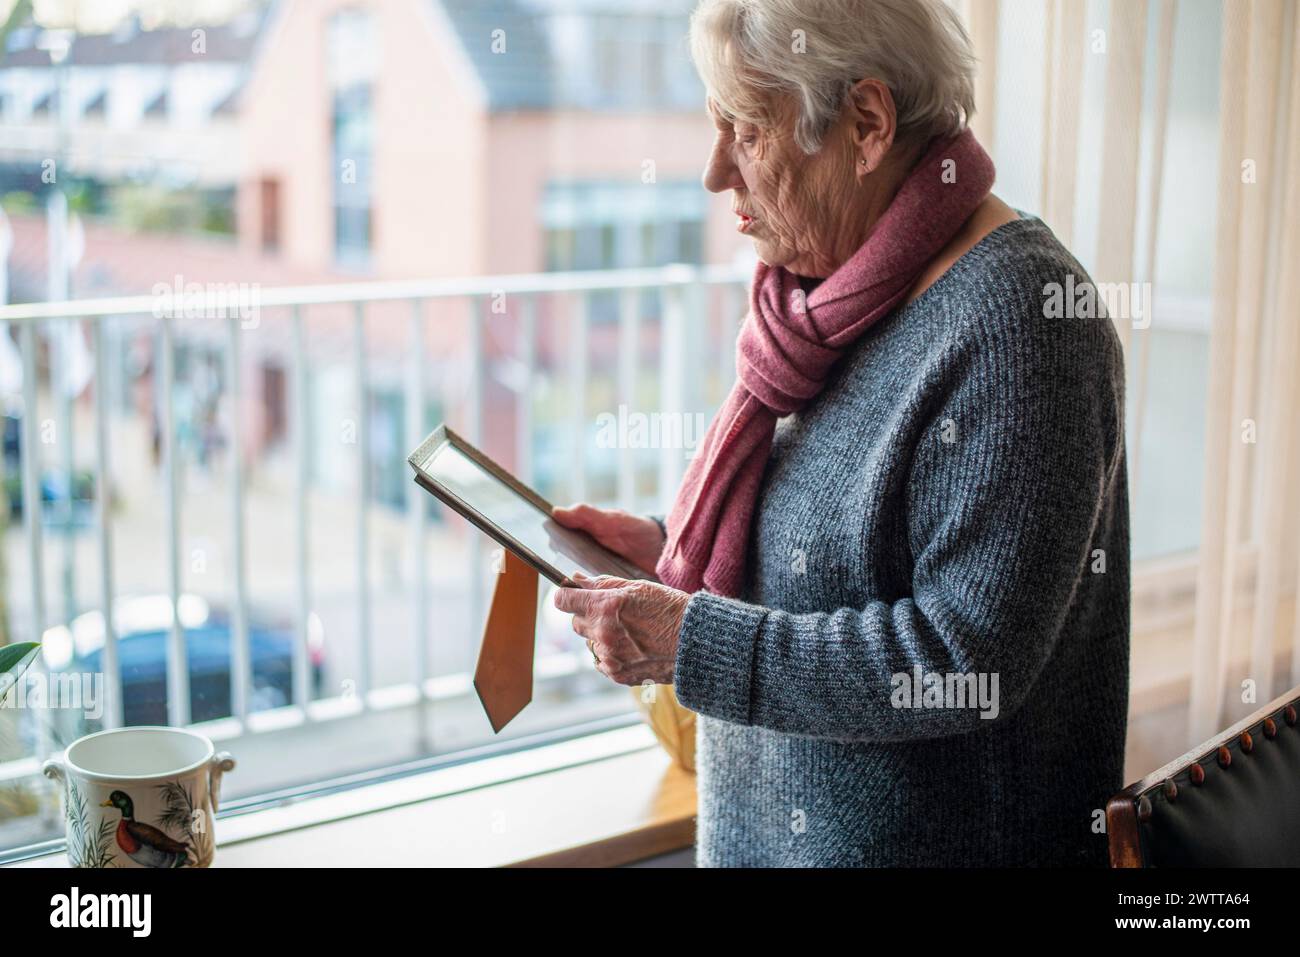 Elderly person reading by the window with a contemplative gaze Stock Photo